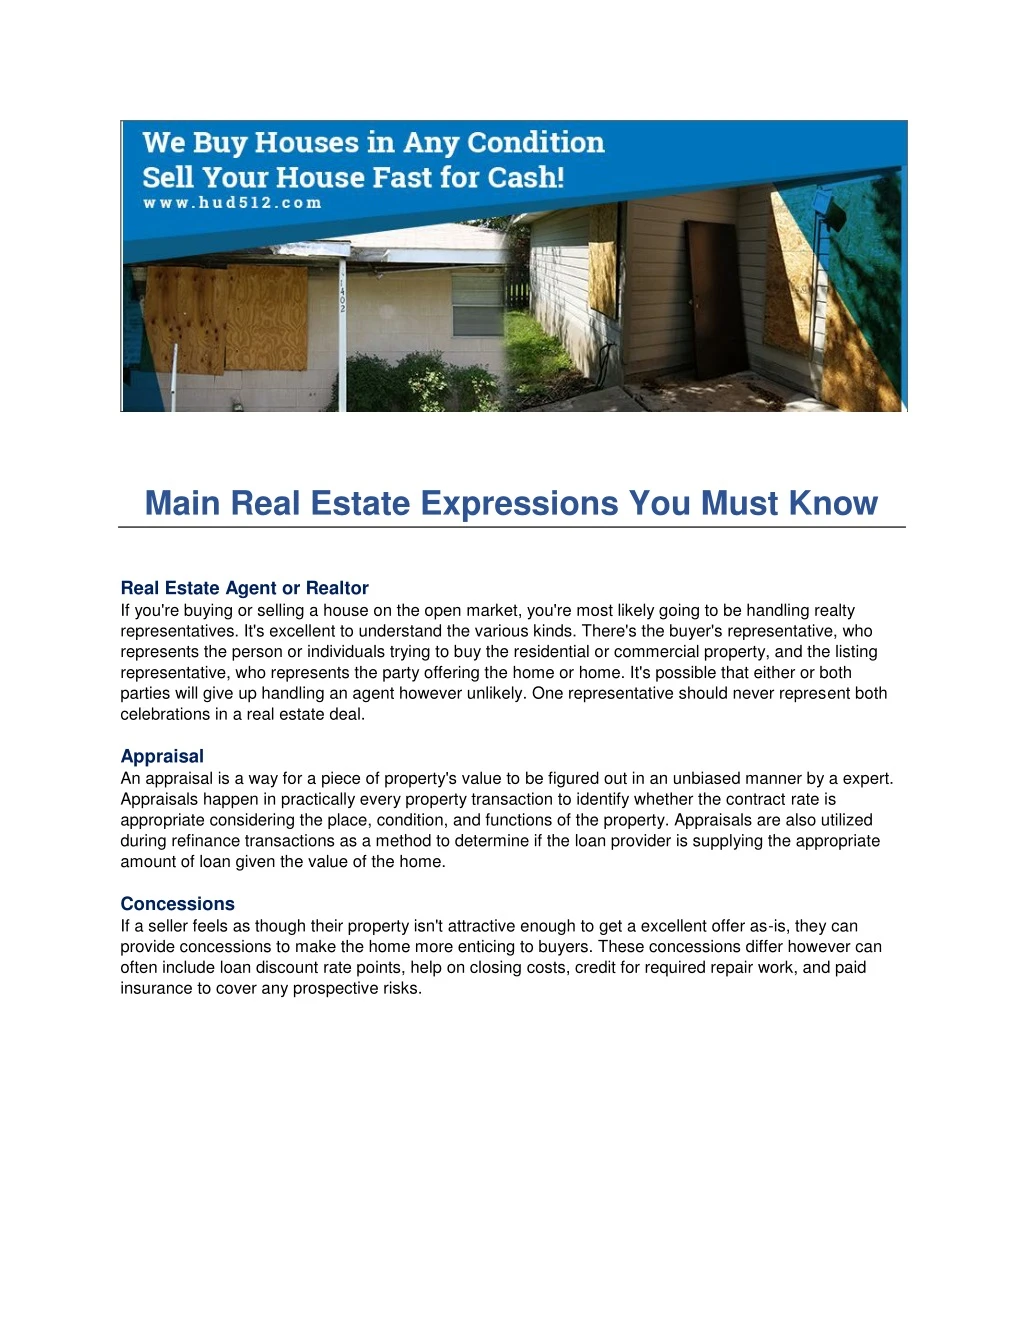 main real estate expressions you must know